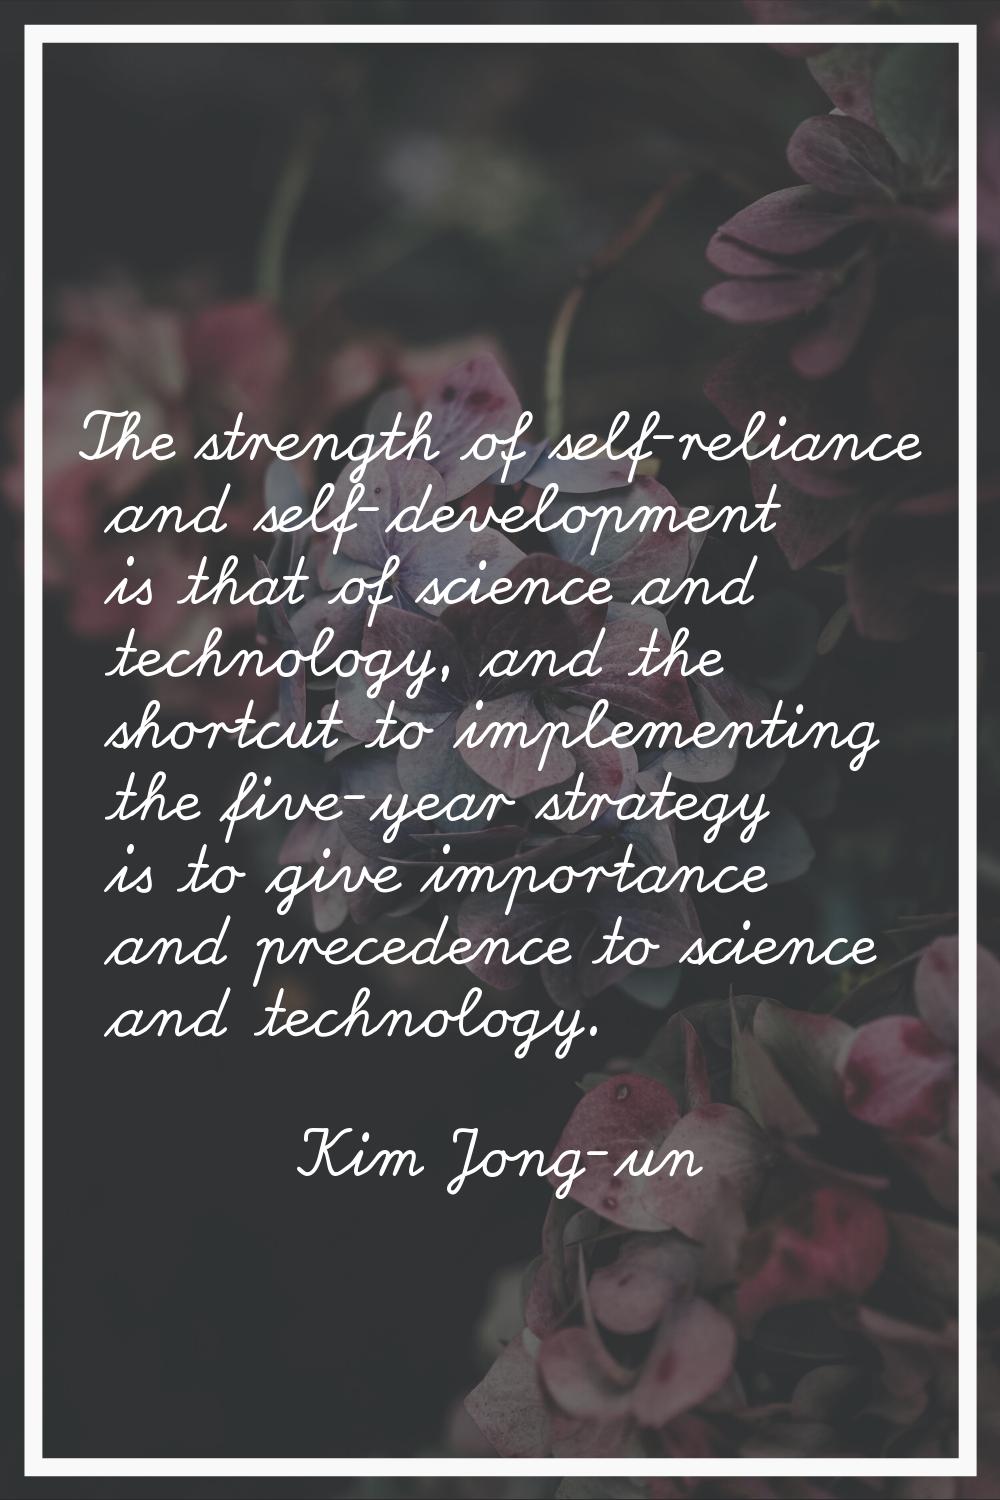 The strength of self-reliance and self-development is that of science and technology, and the short